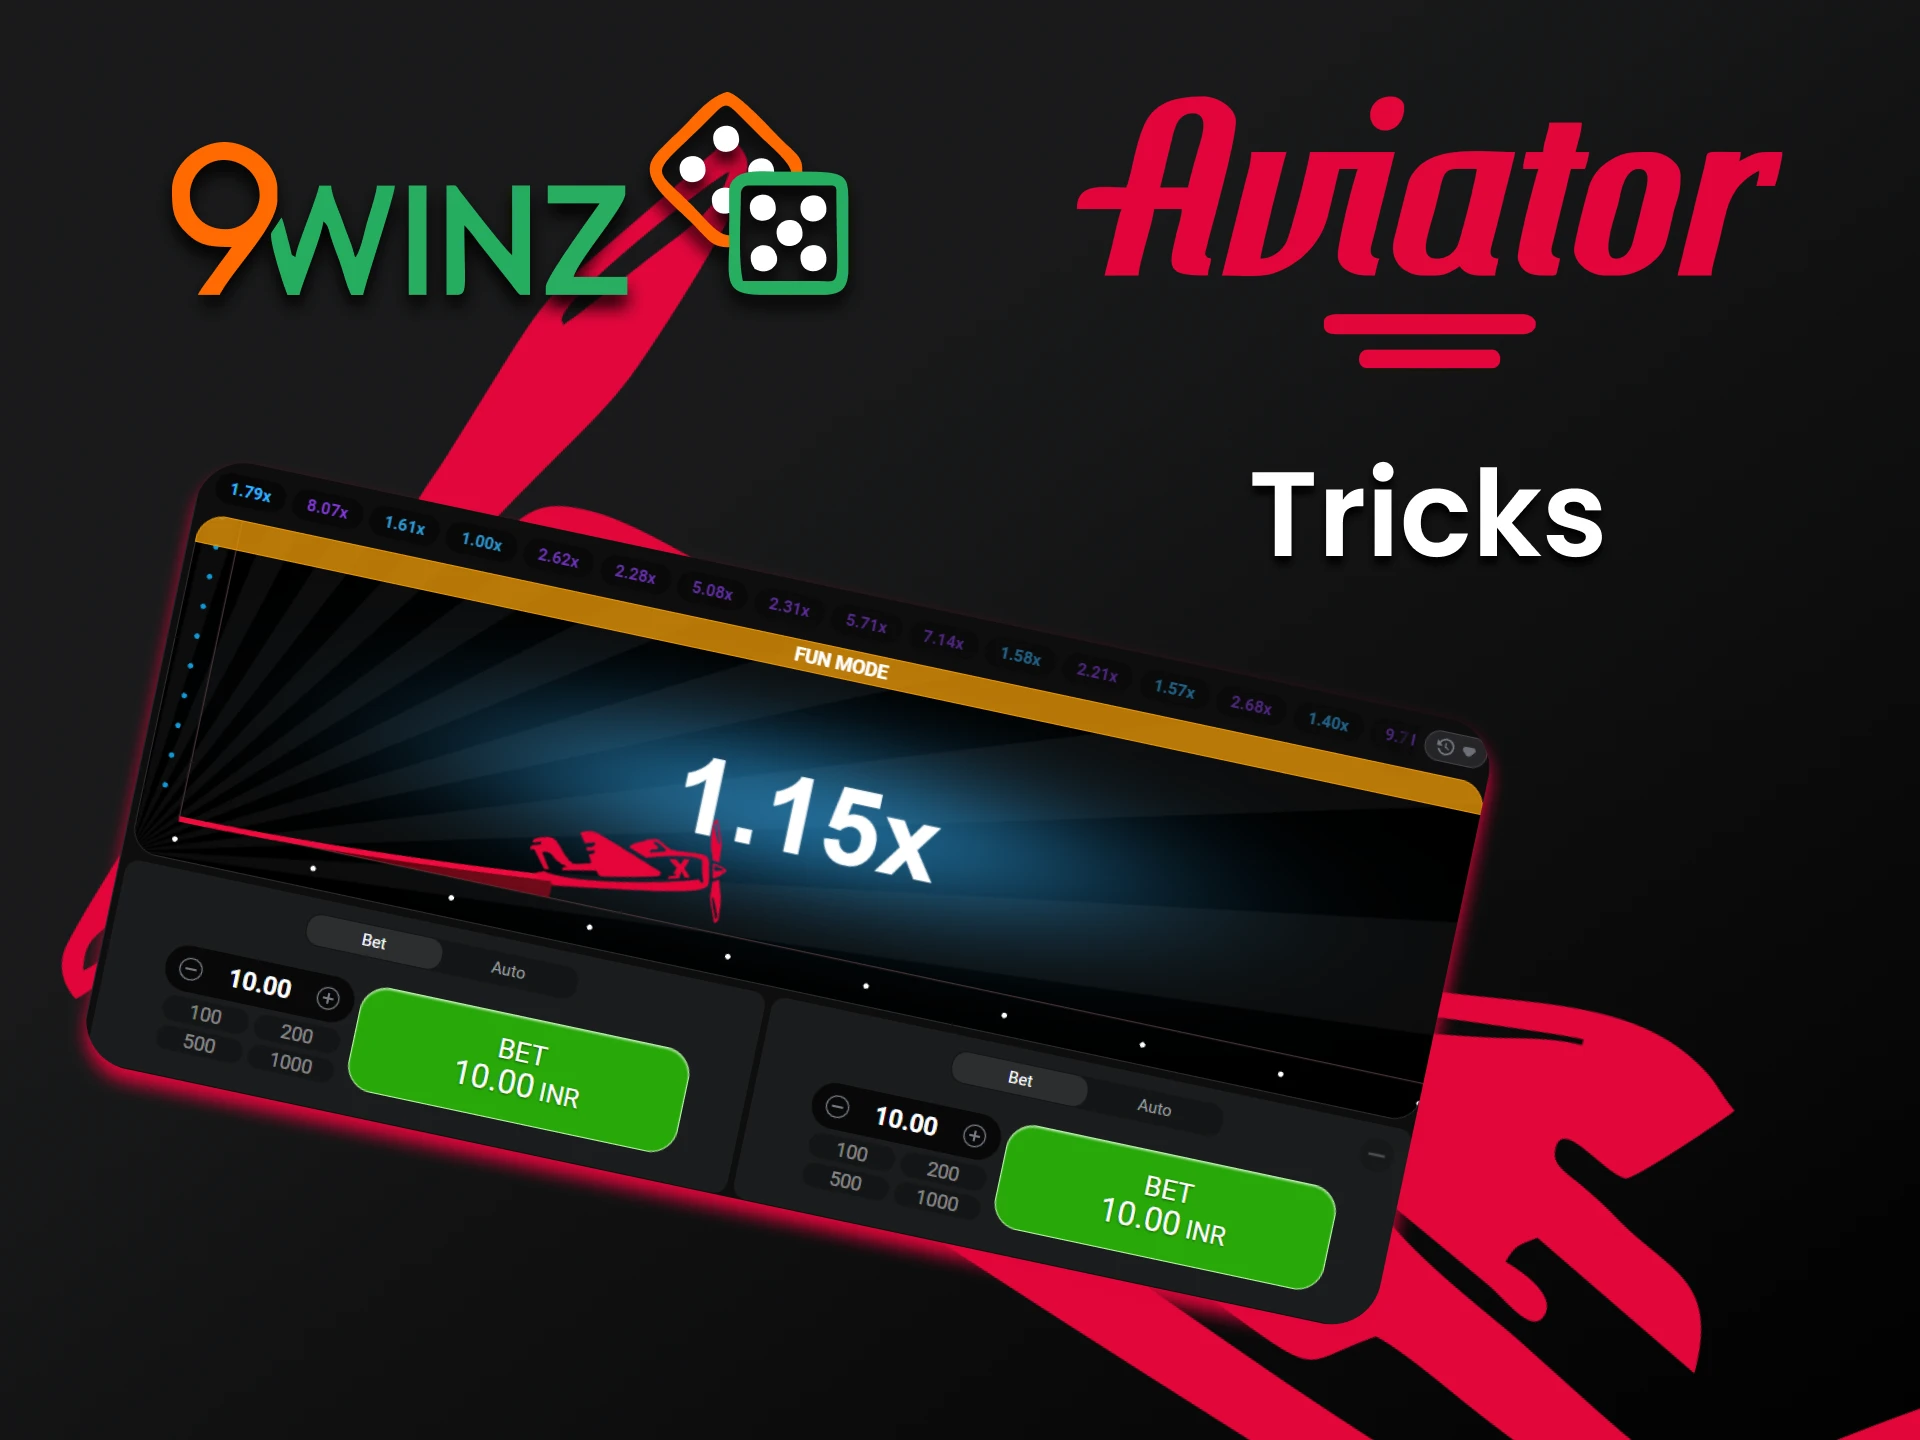 Learn the possible tricks to win the Aviator at 9winz.